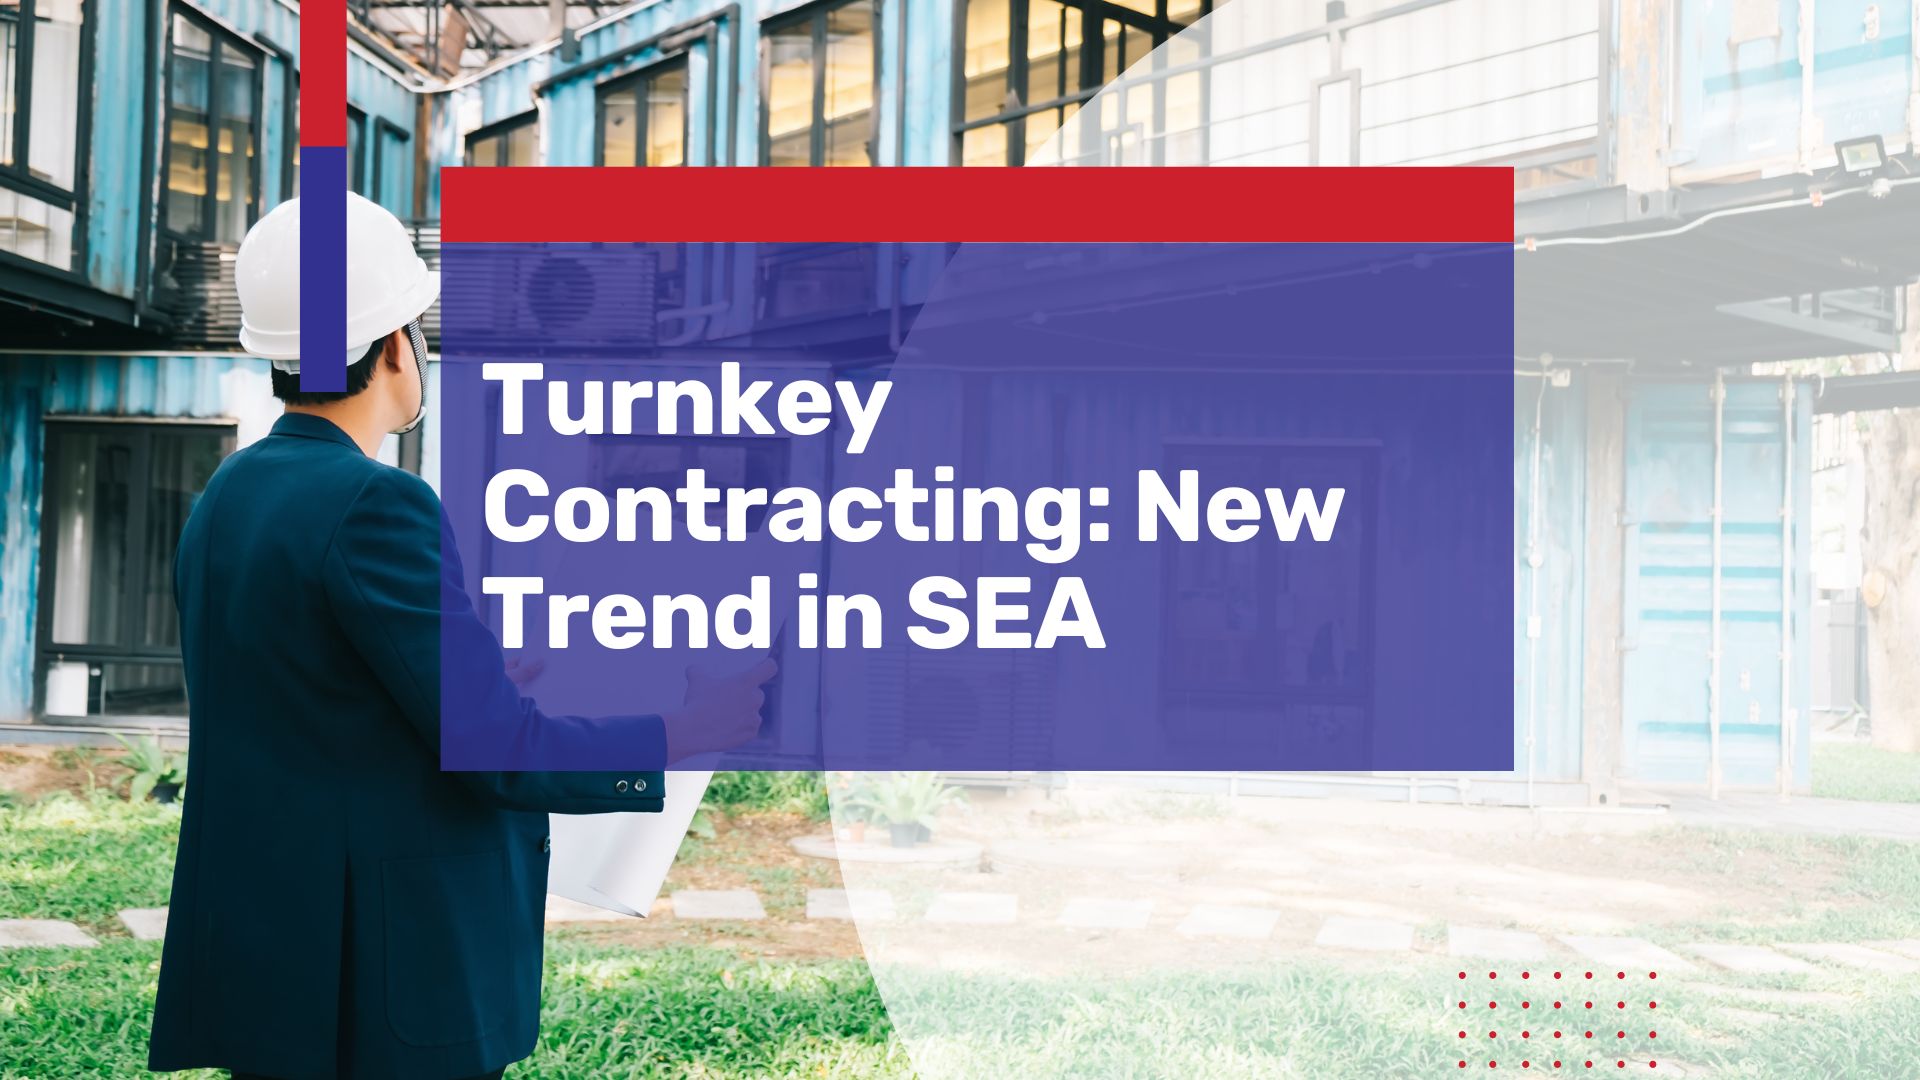 Turnkey Manufacturing (EPC): The Newest Contracting Trend in Southeast Asia